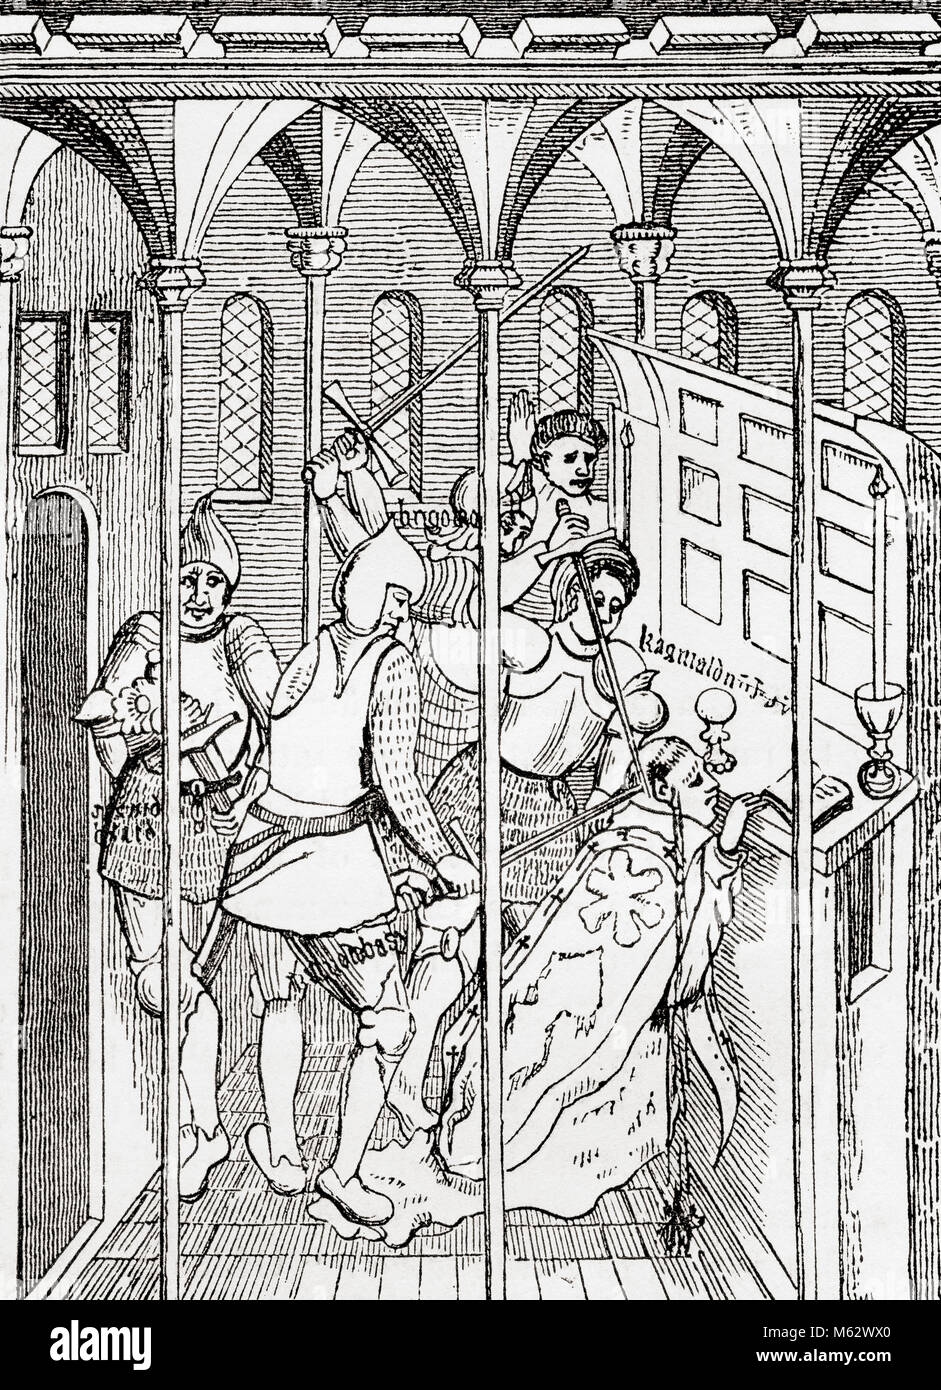 The murder of Thomas Becket in Canterbury cathedral, 1170.  Thomas Becket, aka Saint Thomas of Canterbury, Thomas of London and Thomas à Becket, c. 1119/1120 – 1170.  Archbishop of Canterbury.  From Old England: A Pictorial Museum, published 1847. Stock Photo